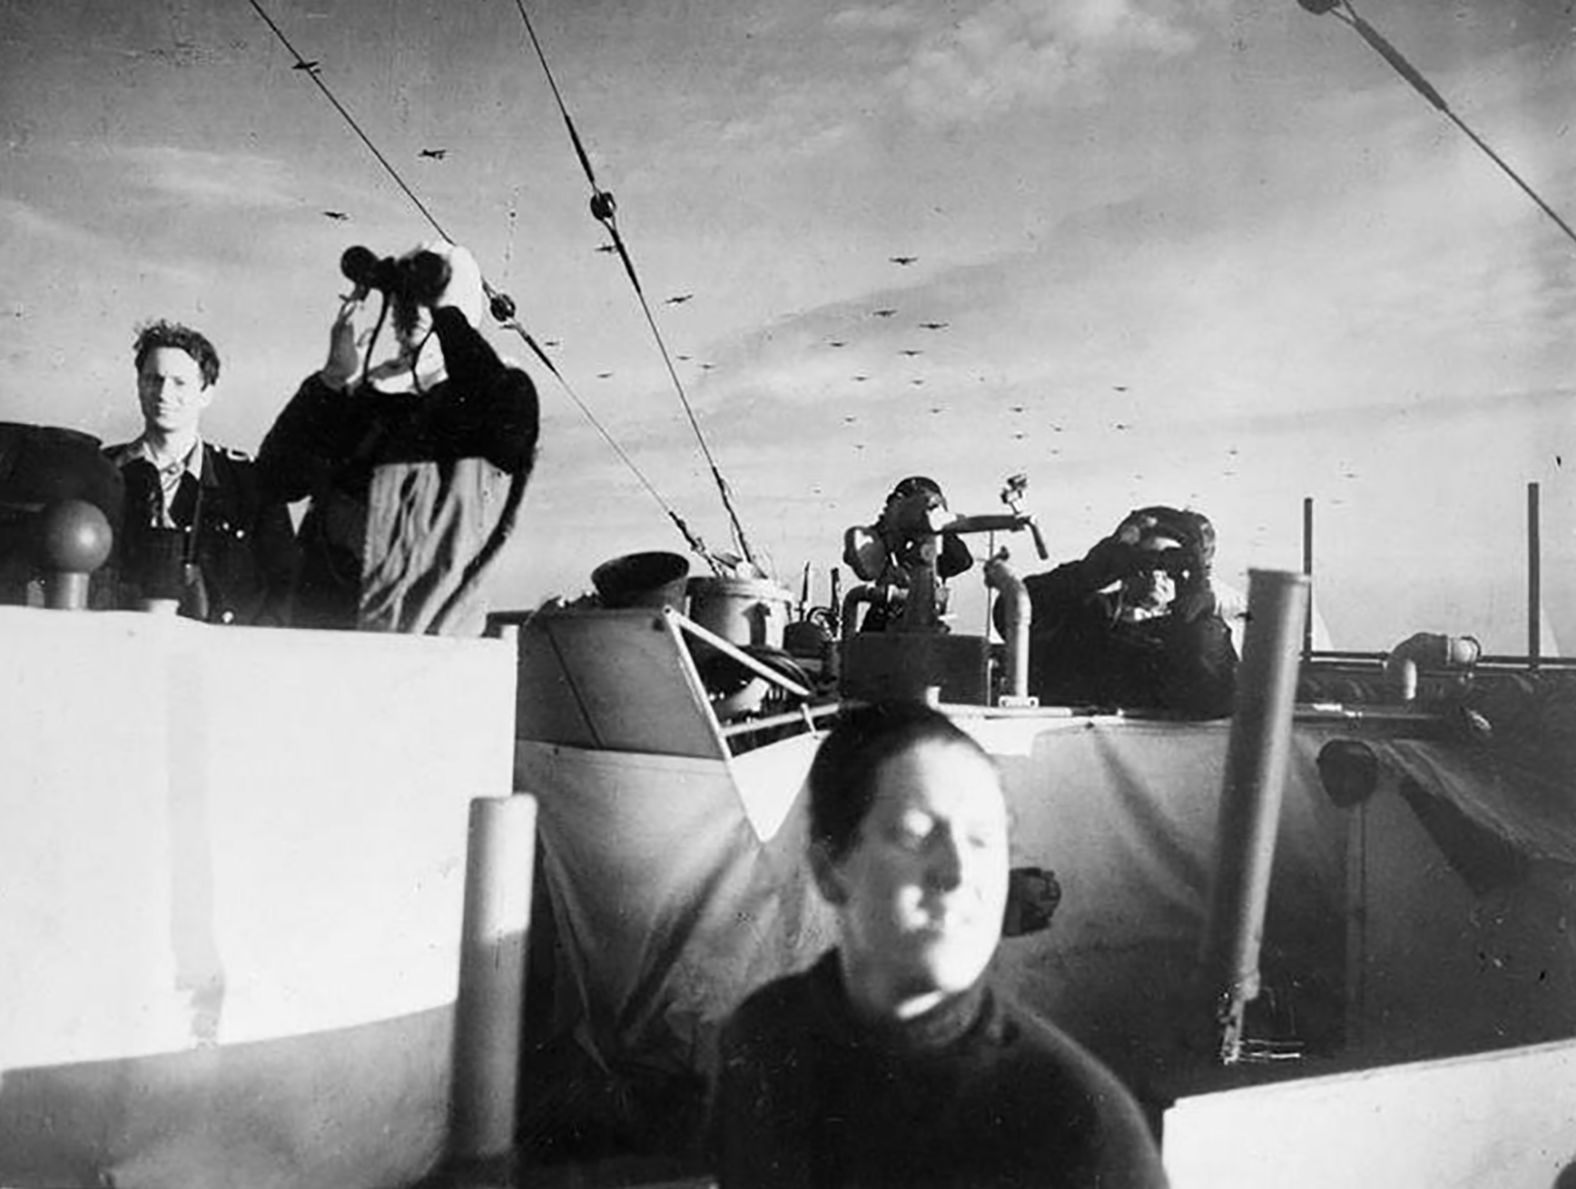 The crew on the British frigate HMS Holmes keep watch as gliders pass overhead with reinforcements from the 6th Airborne Division.